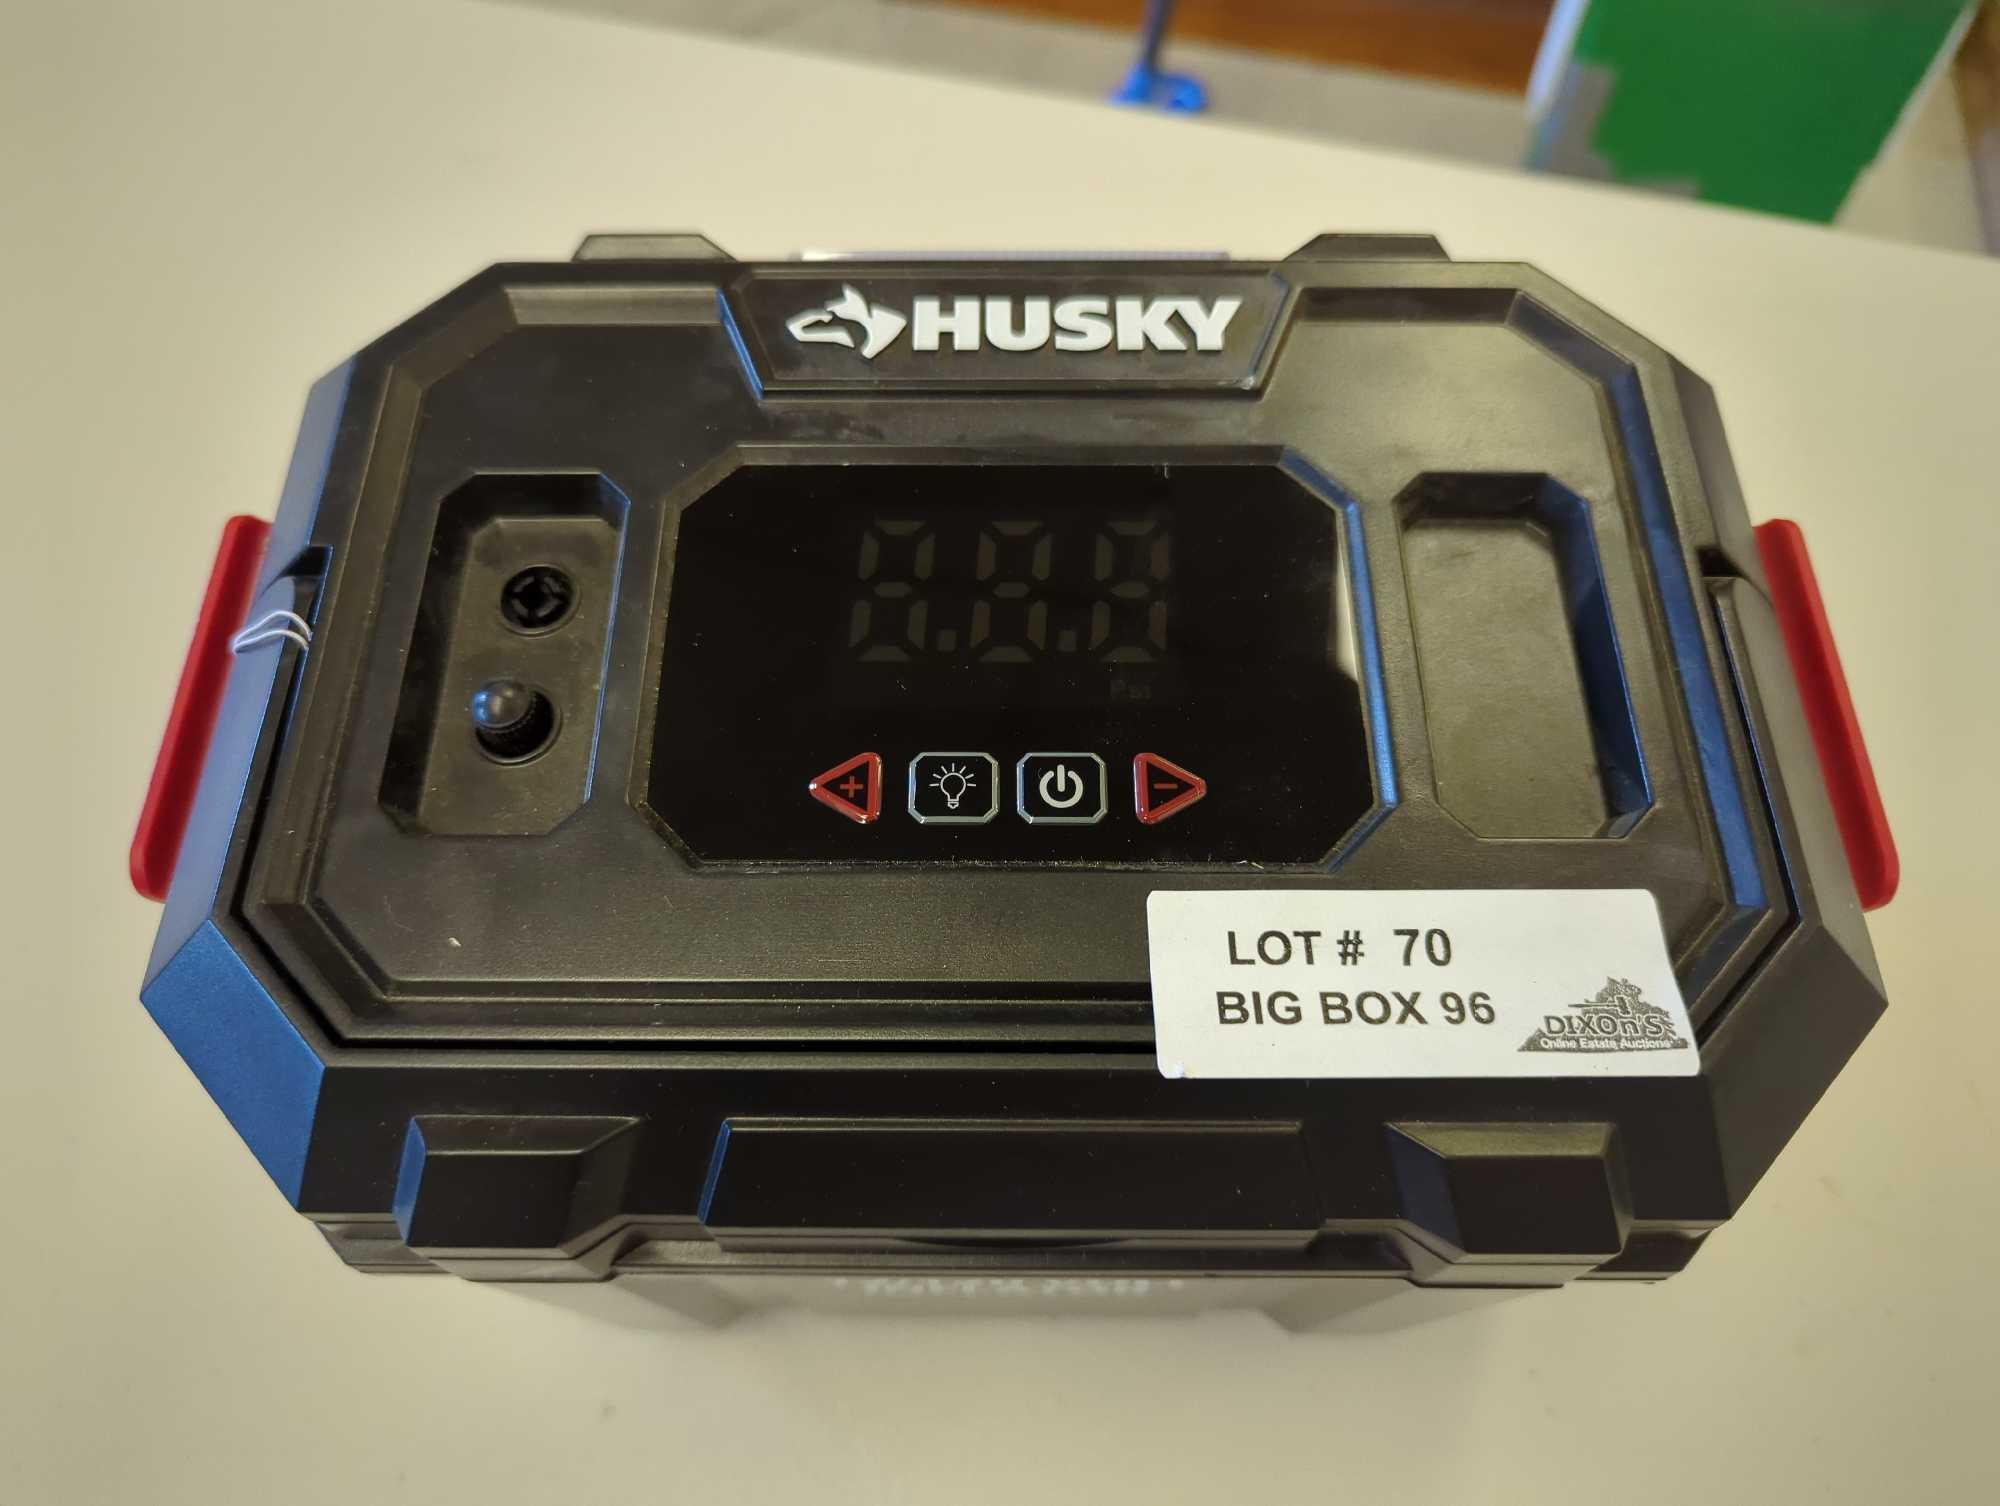 Husky 12-Volt/120-Volt Home & Auto Tire Inflator. Comes as is shown in photos. Appears to be new.